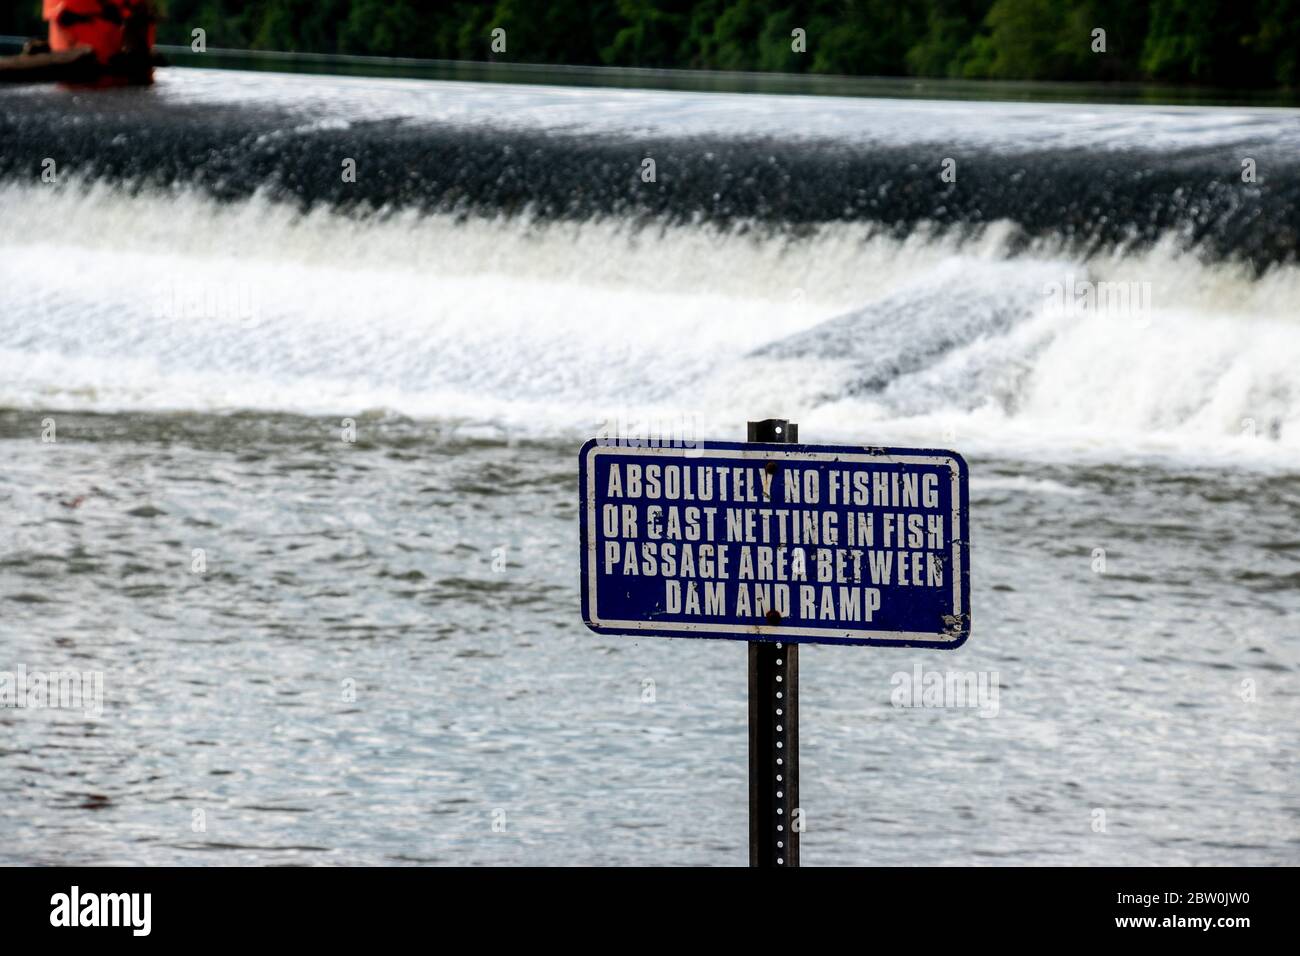 https://c8.alamy.com/comp/2BW0JW0/a-sign-with-a-dark-blue-background-and-white-lettering-that-states-absolutely-no-fishing-or-cast-netting-in-fish-passage-area-between-dam-and-ramp-2BW0JW0.jpg